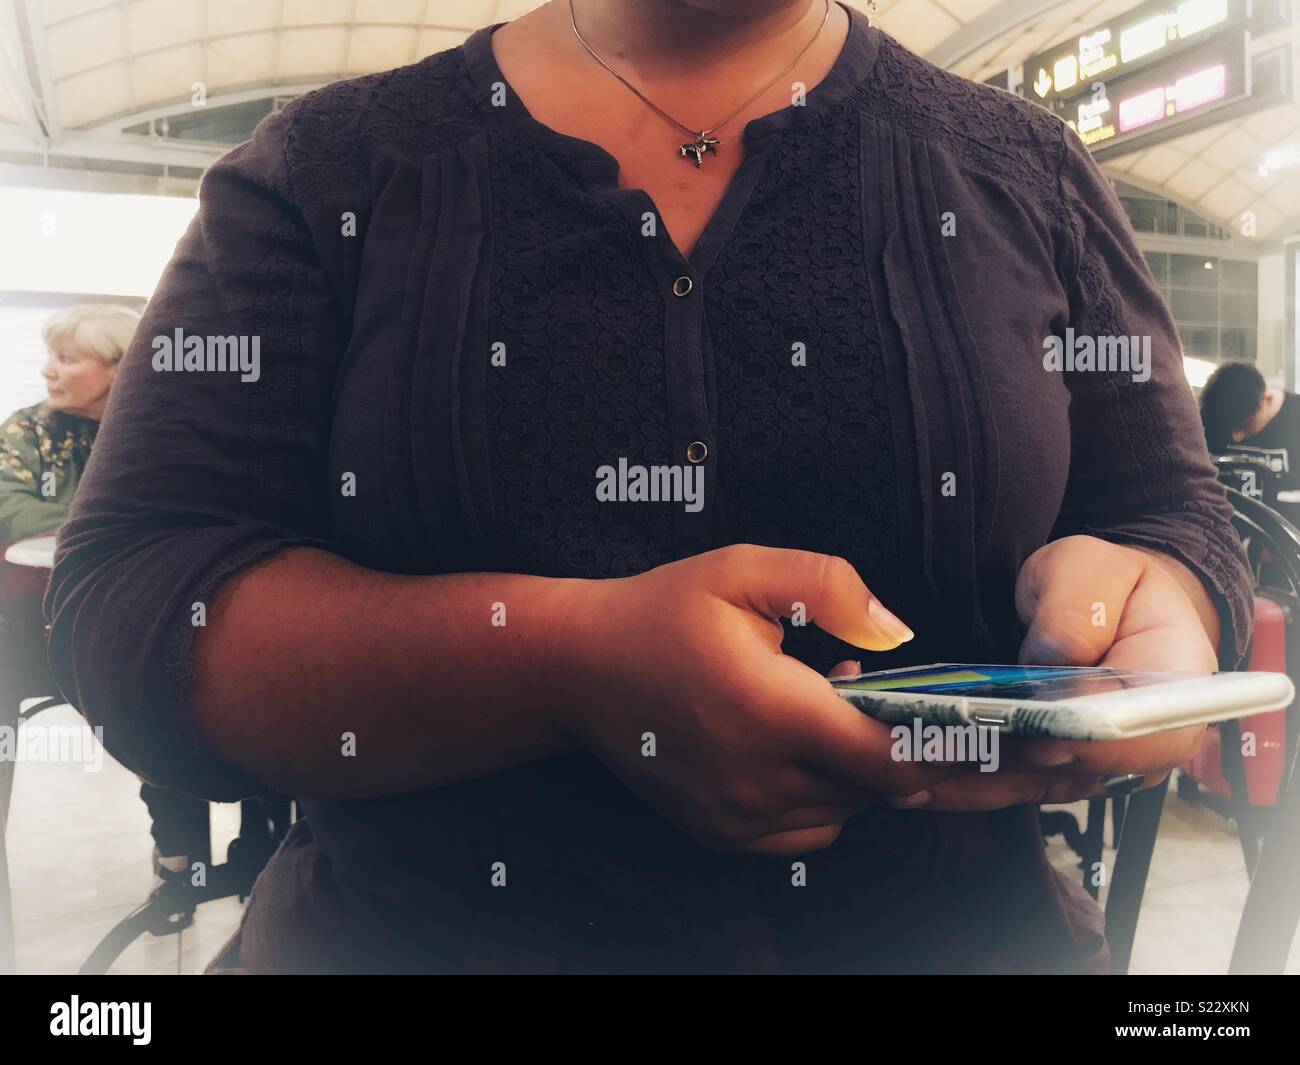 Woman using a smartphone at the airport Stock Photo